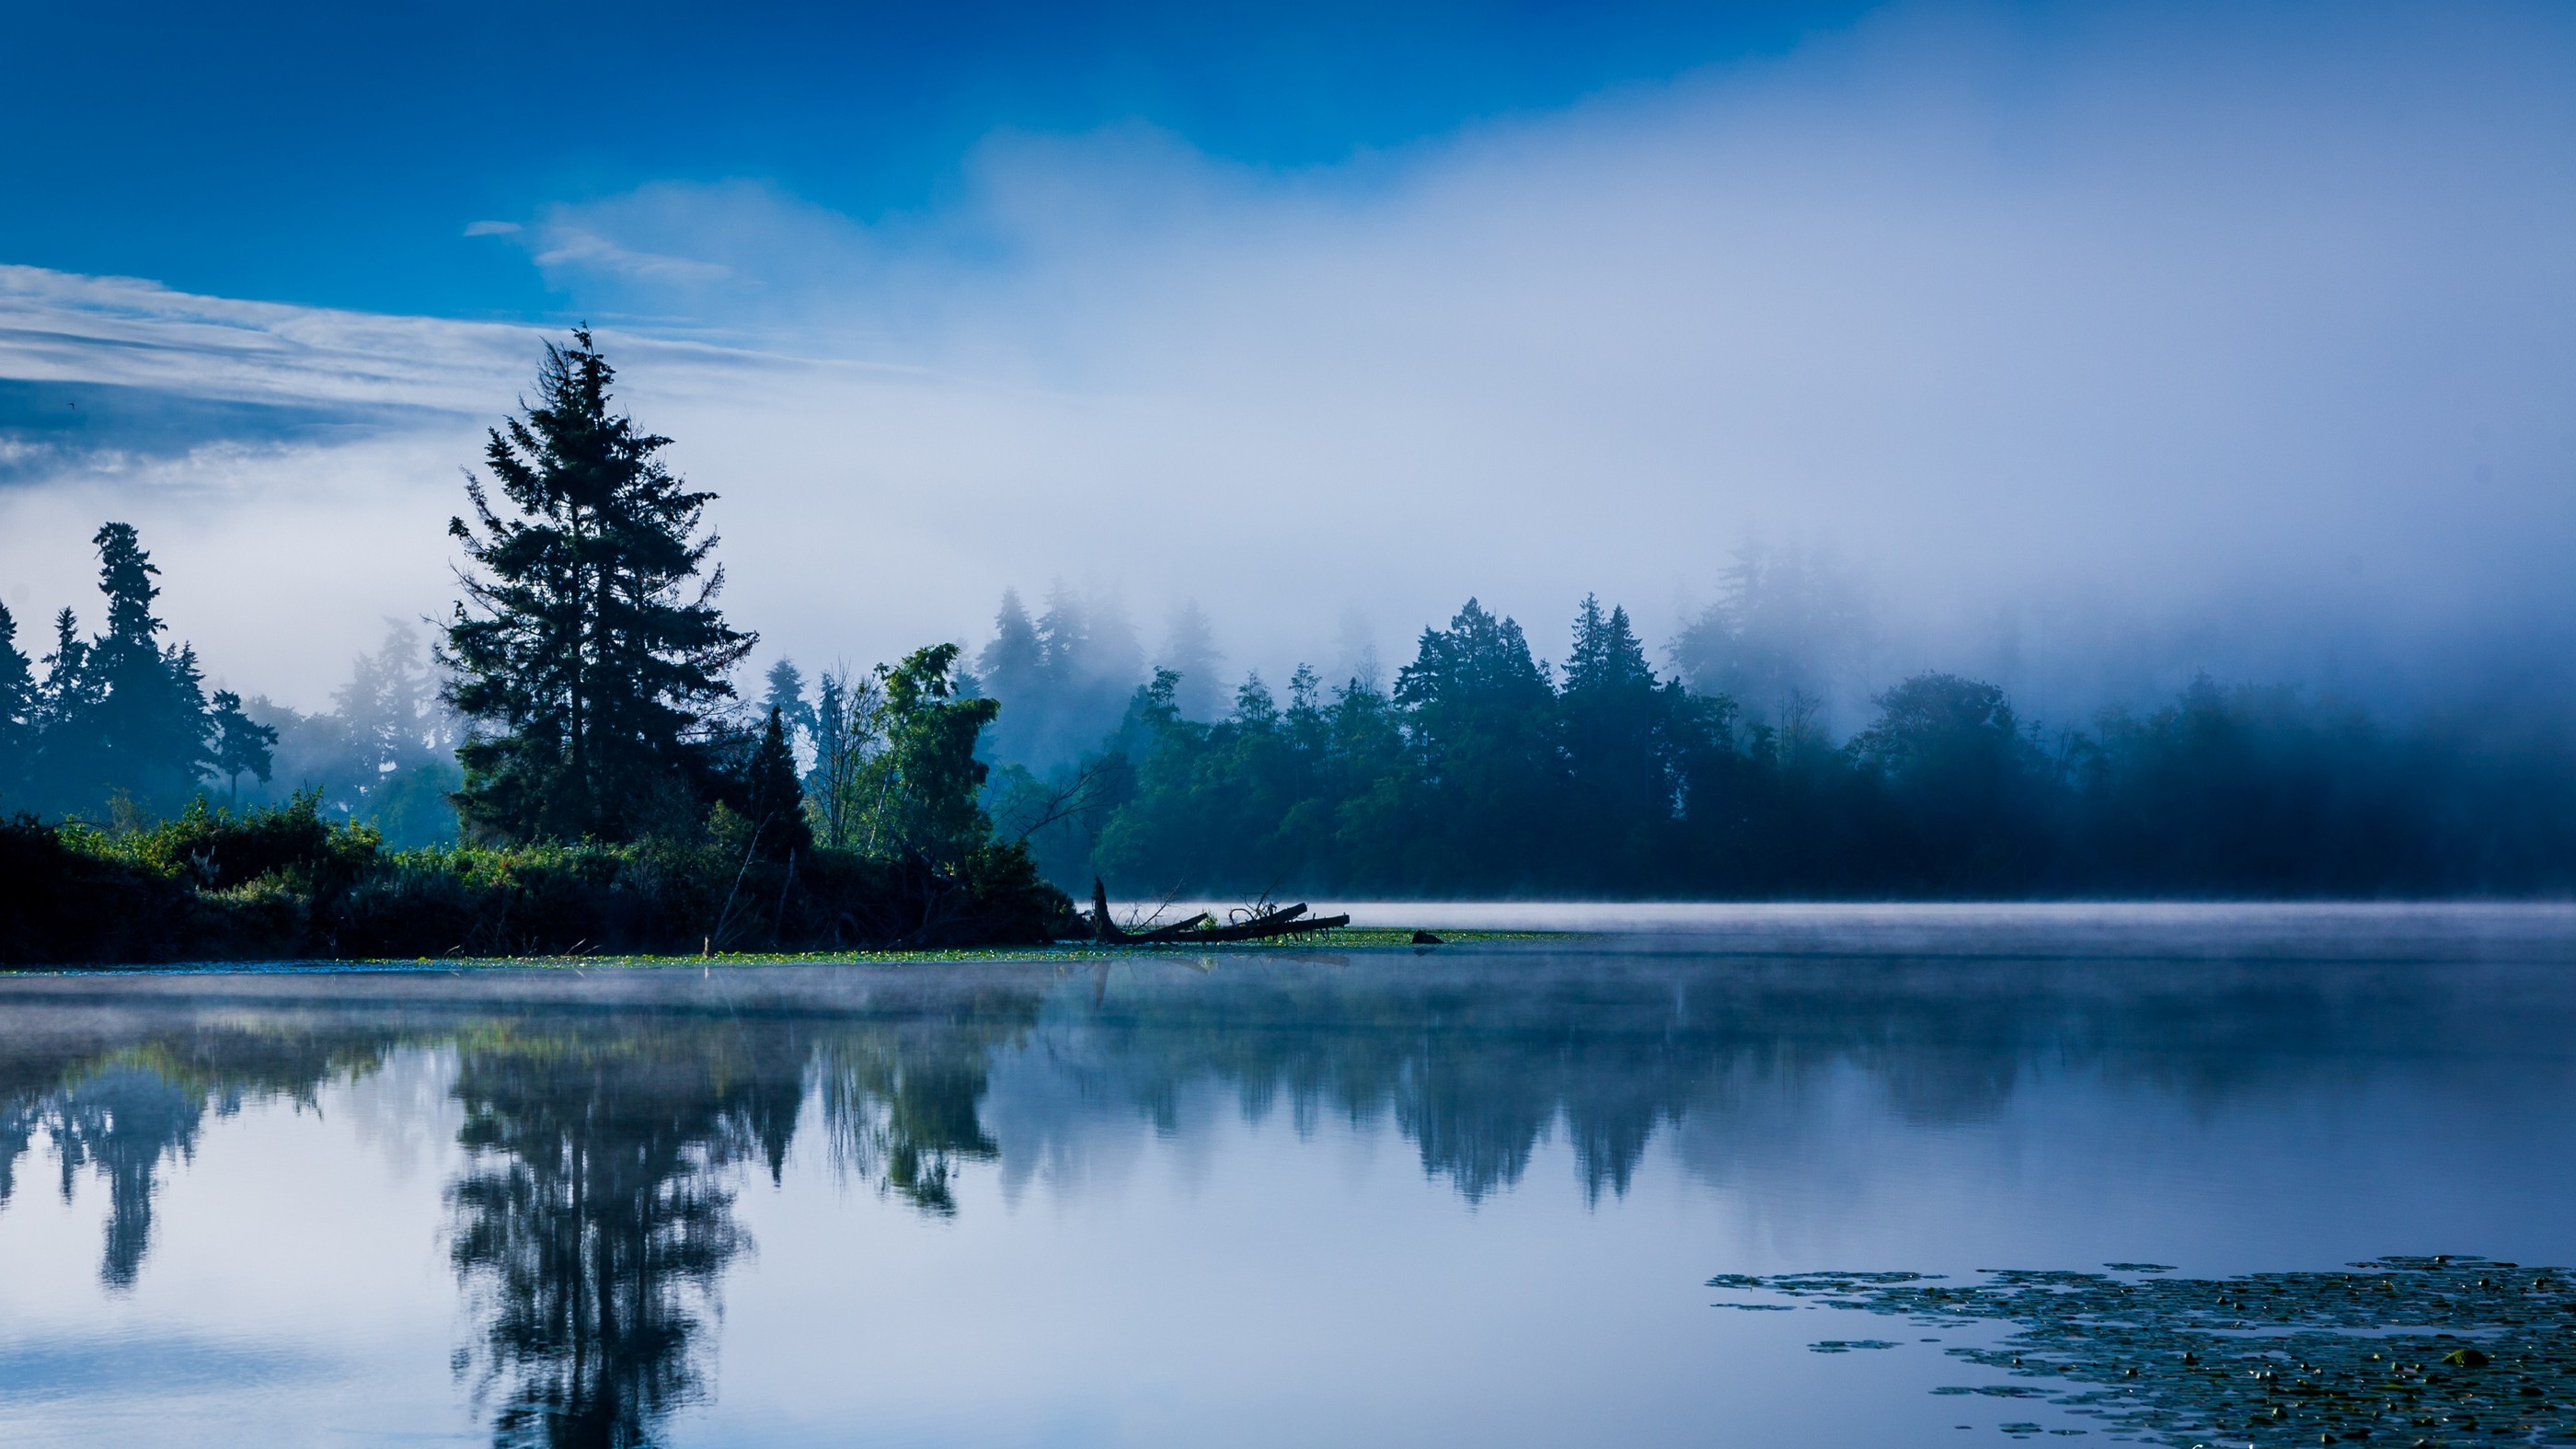 General 2800x1575 lake morning mist blue forest water reflection Washington State nature landscape trees USA